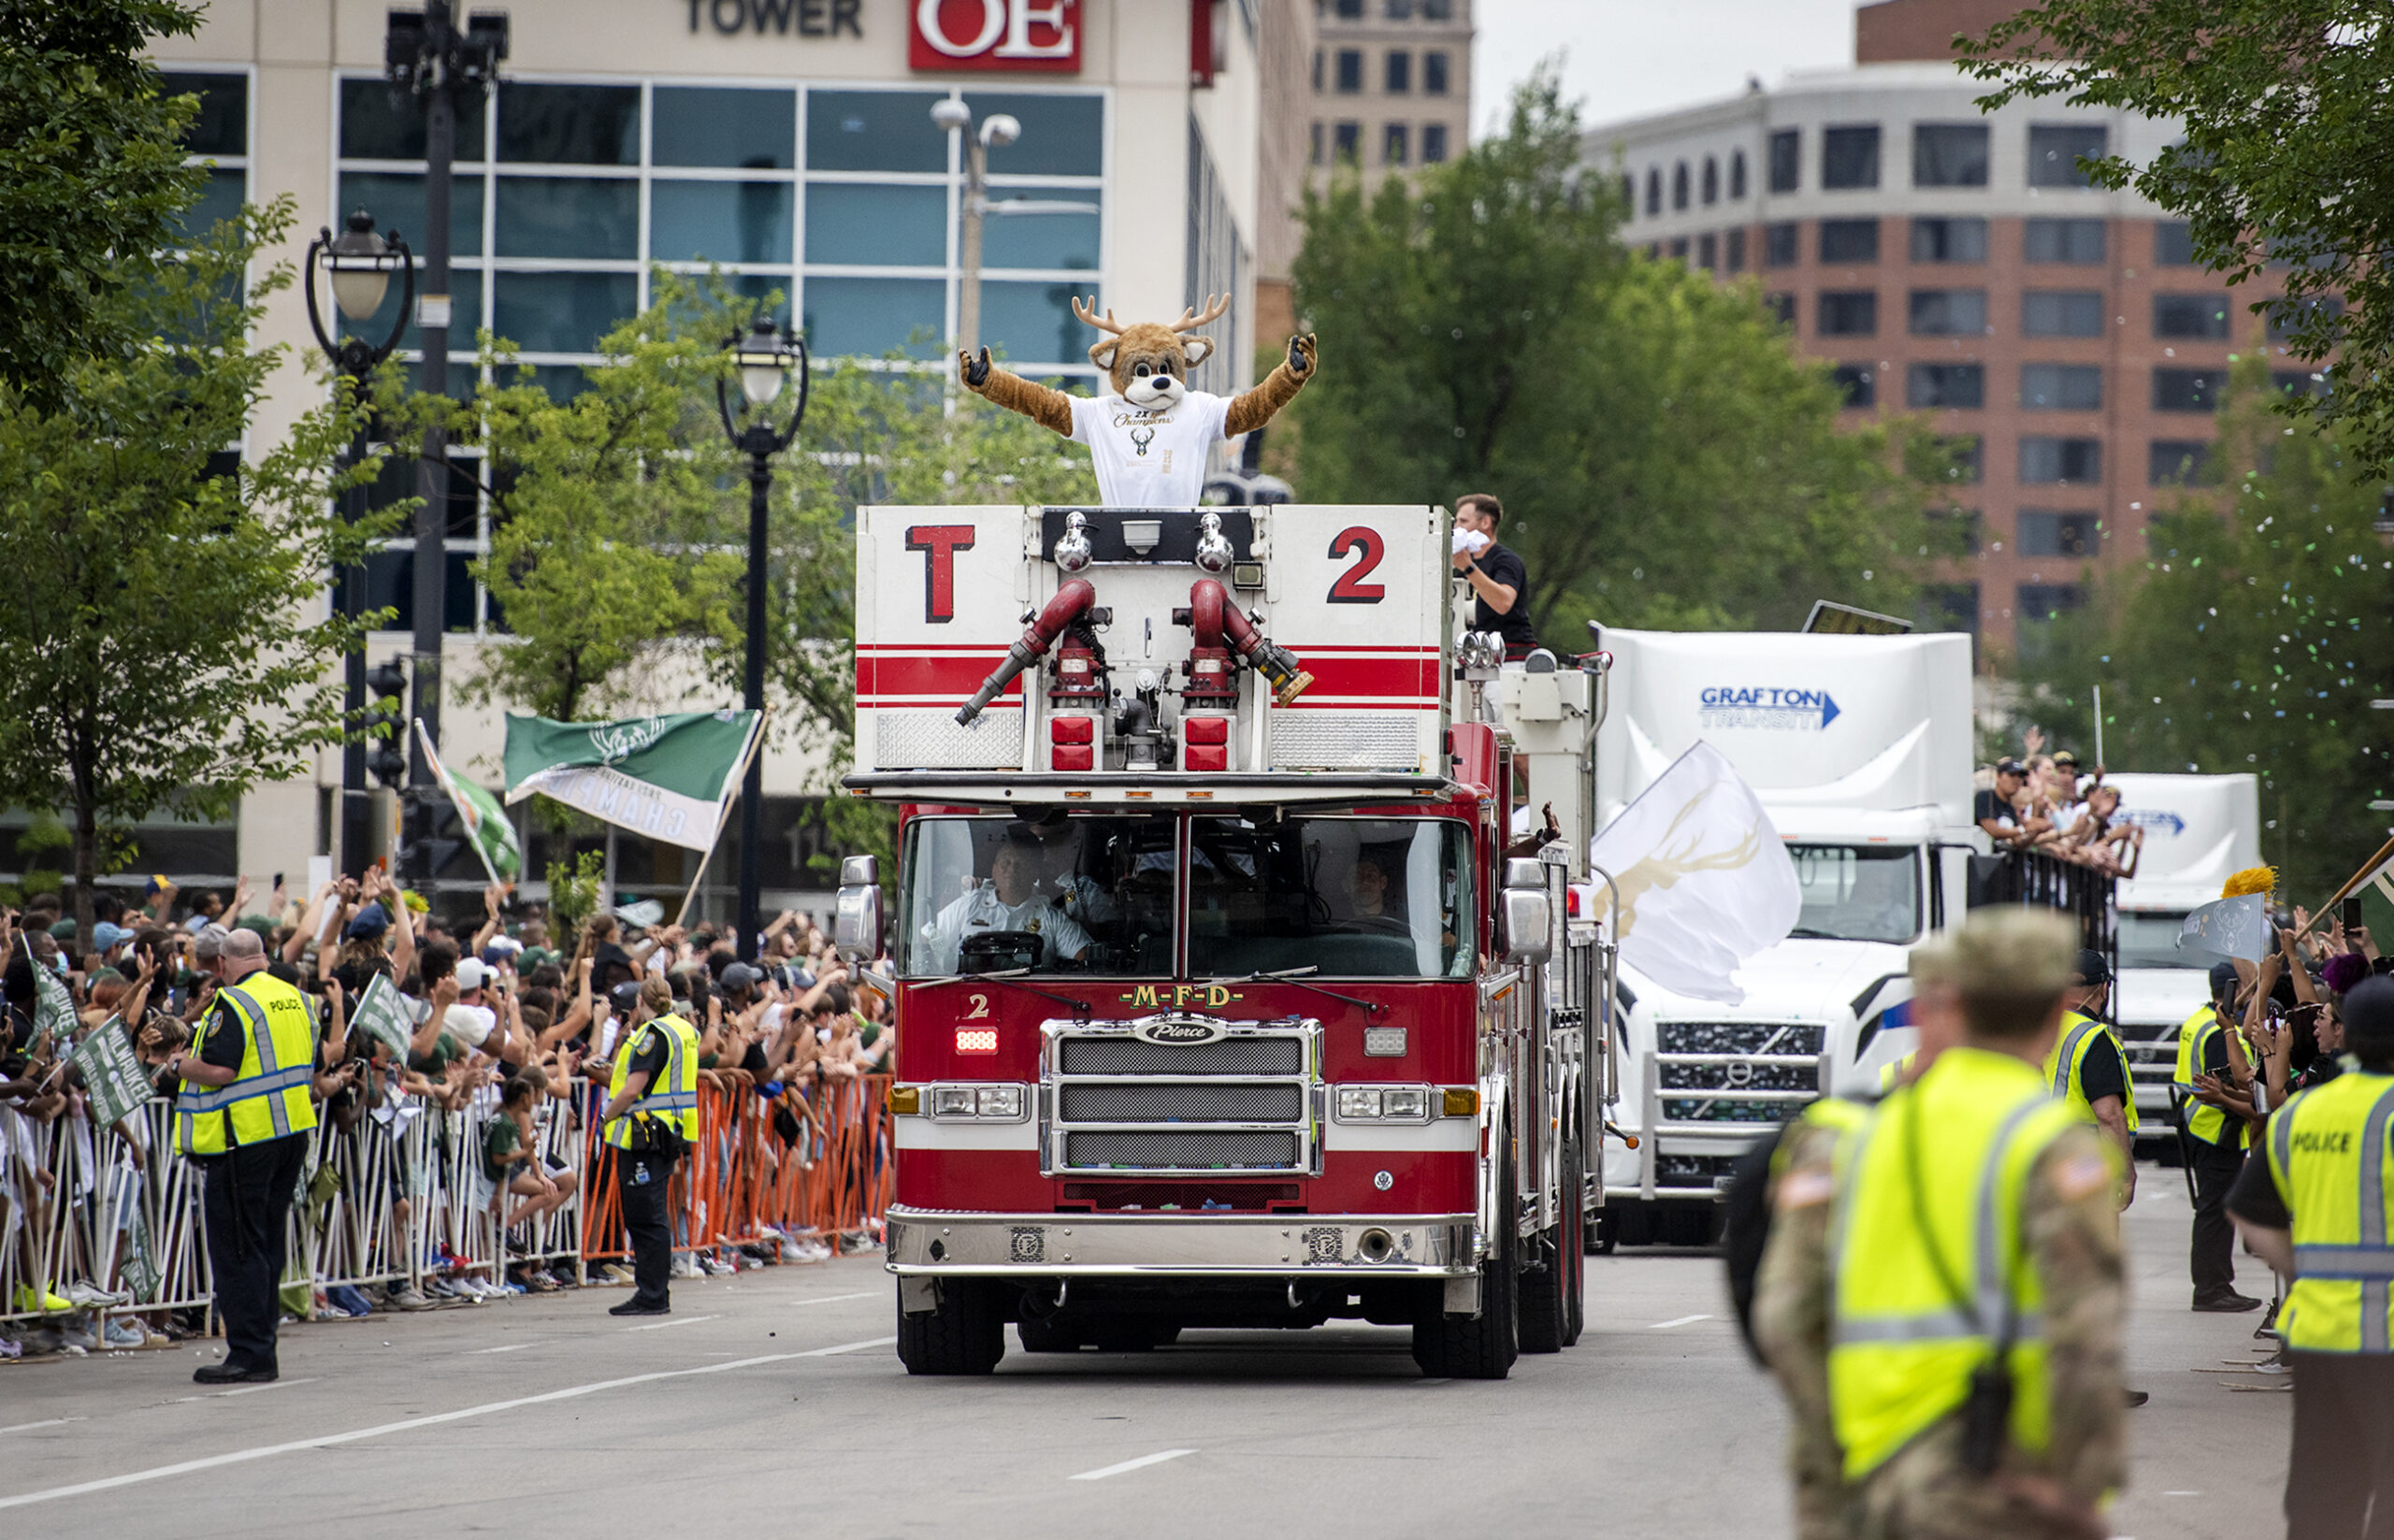 Bango sits on top of a fire truck.